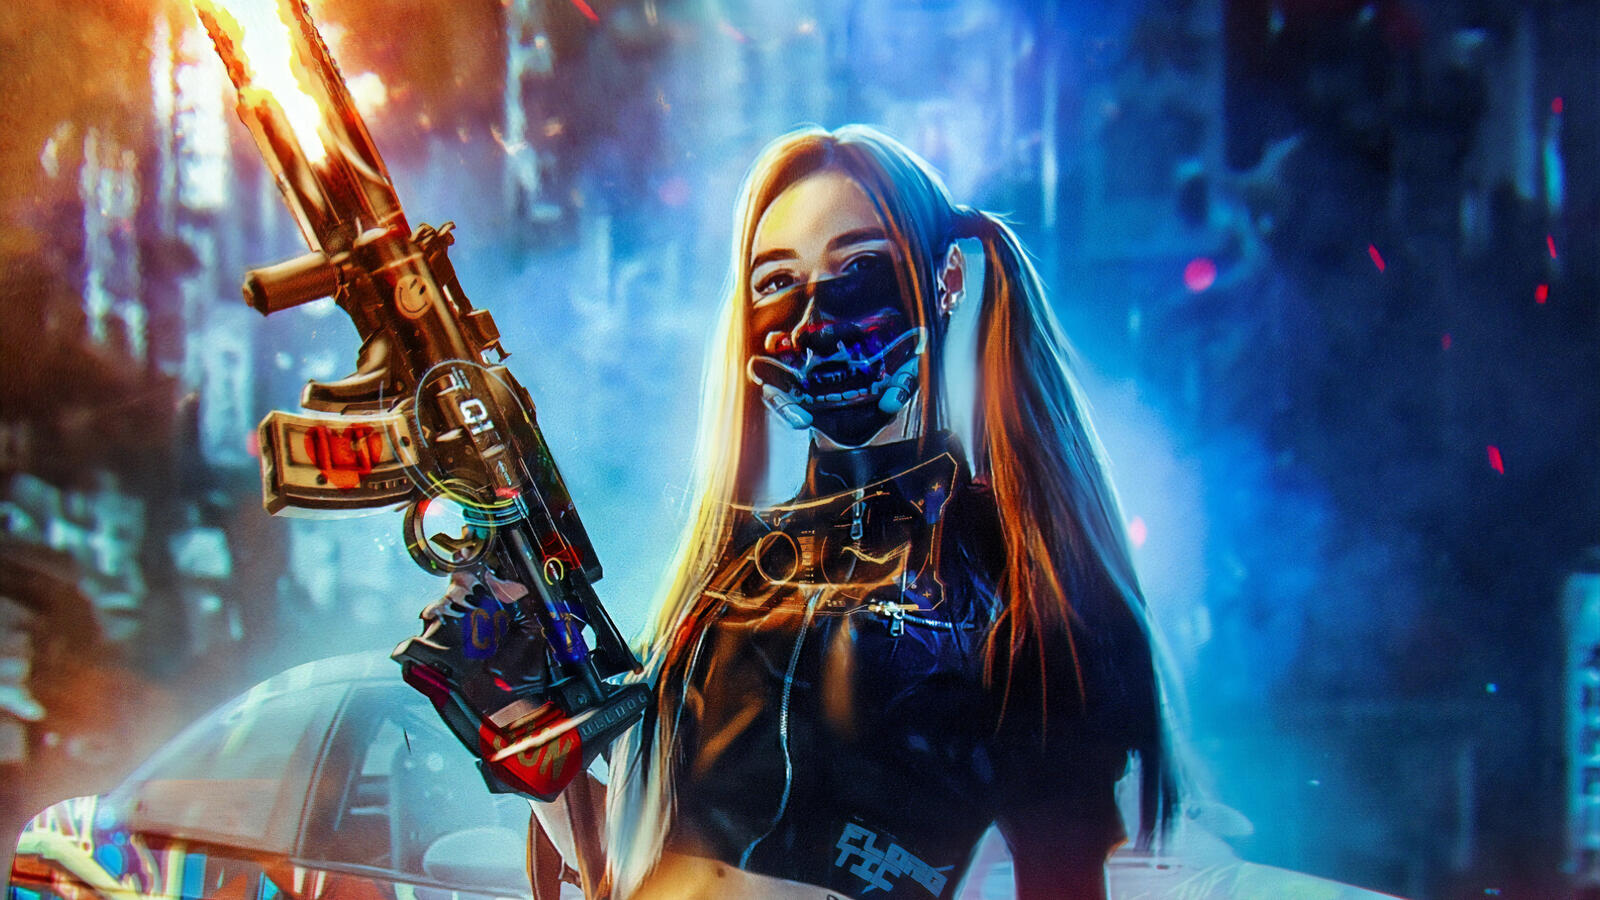 Free photo Rendering of a masked girl with a cyberpunk machine gun